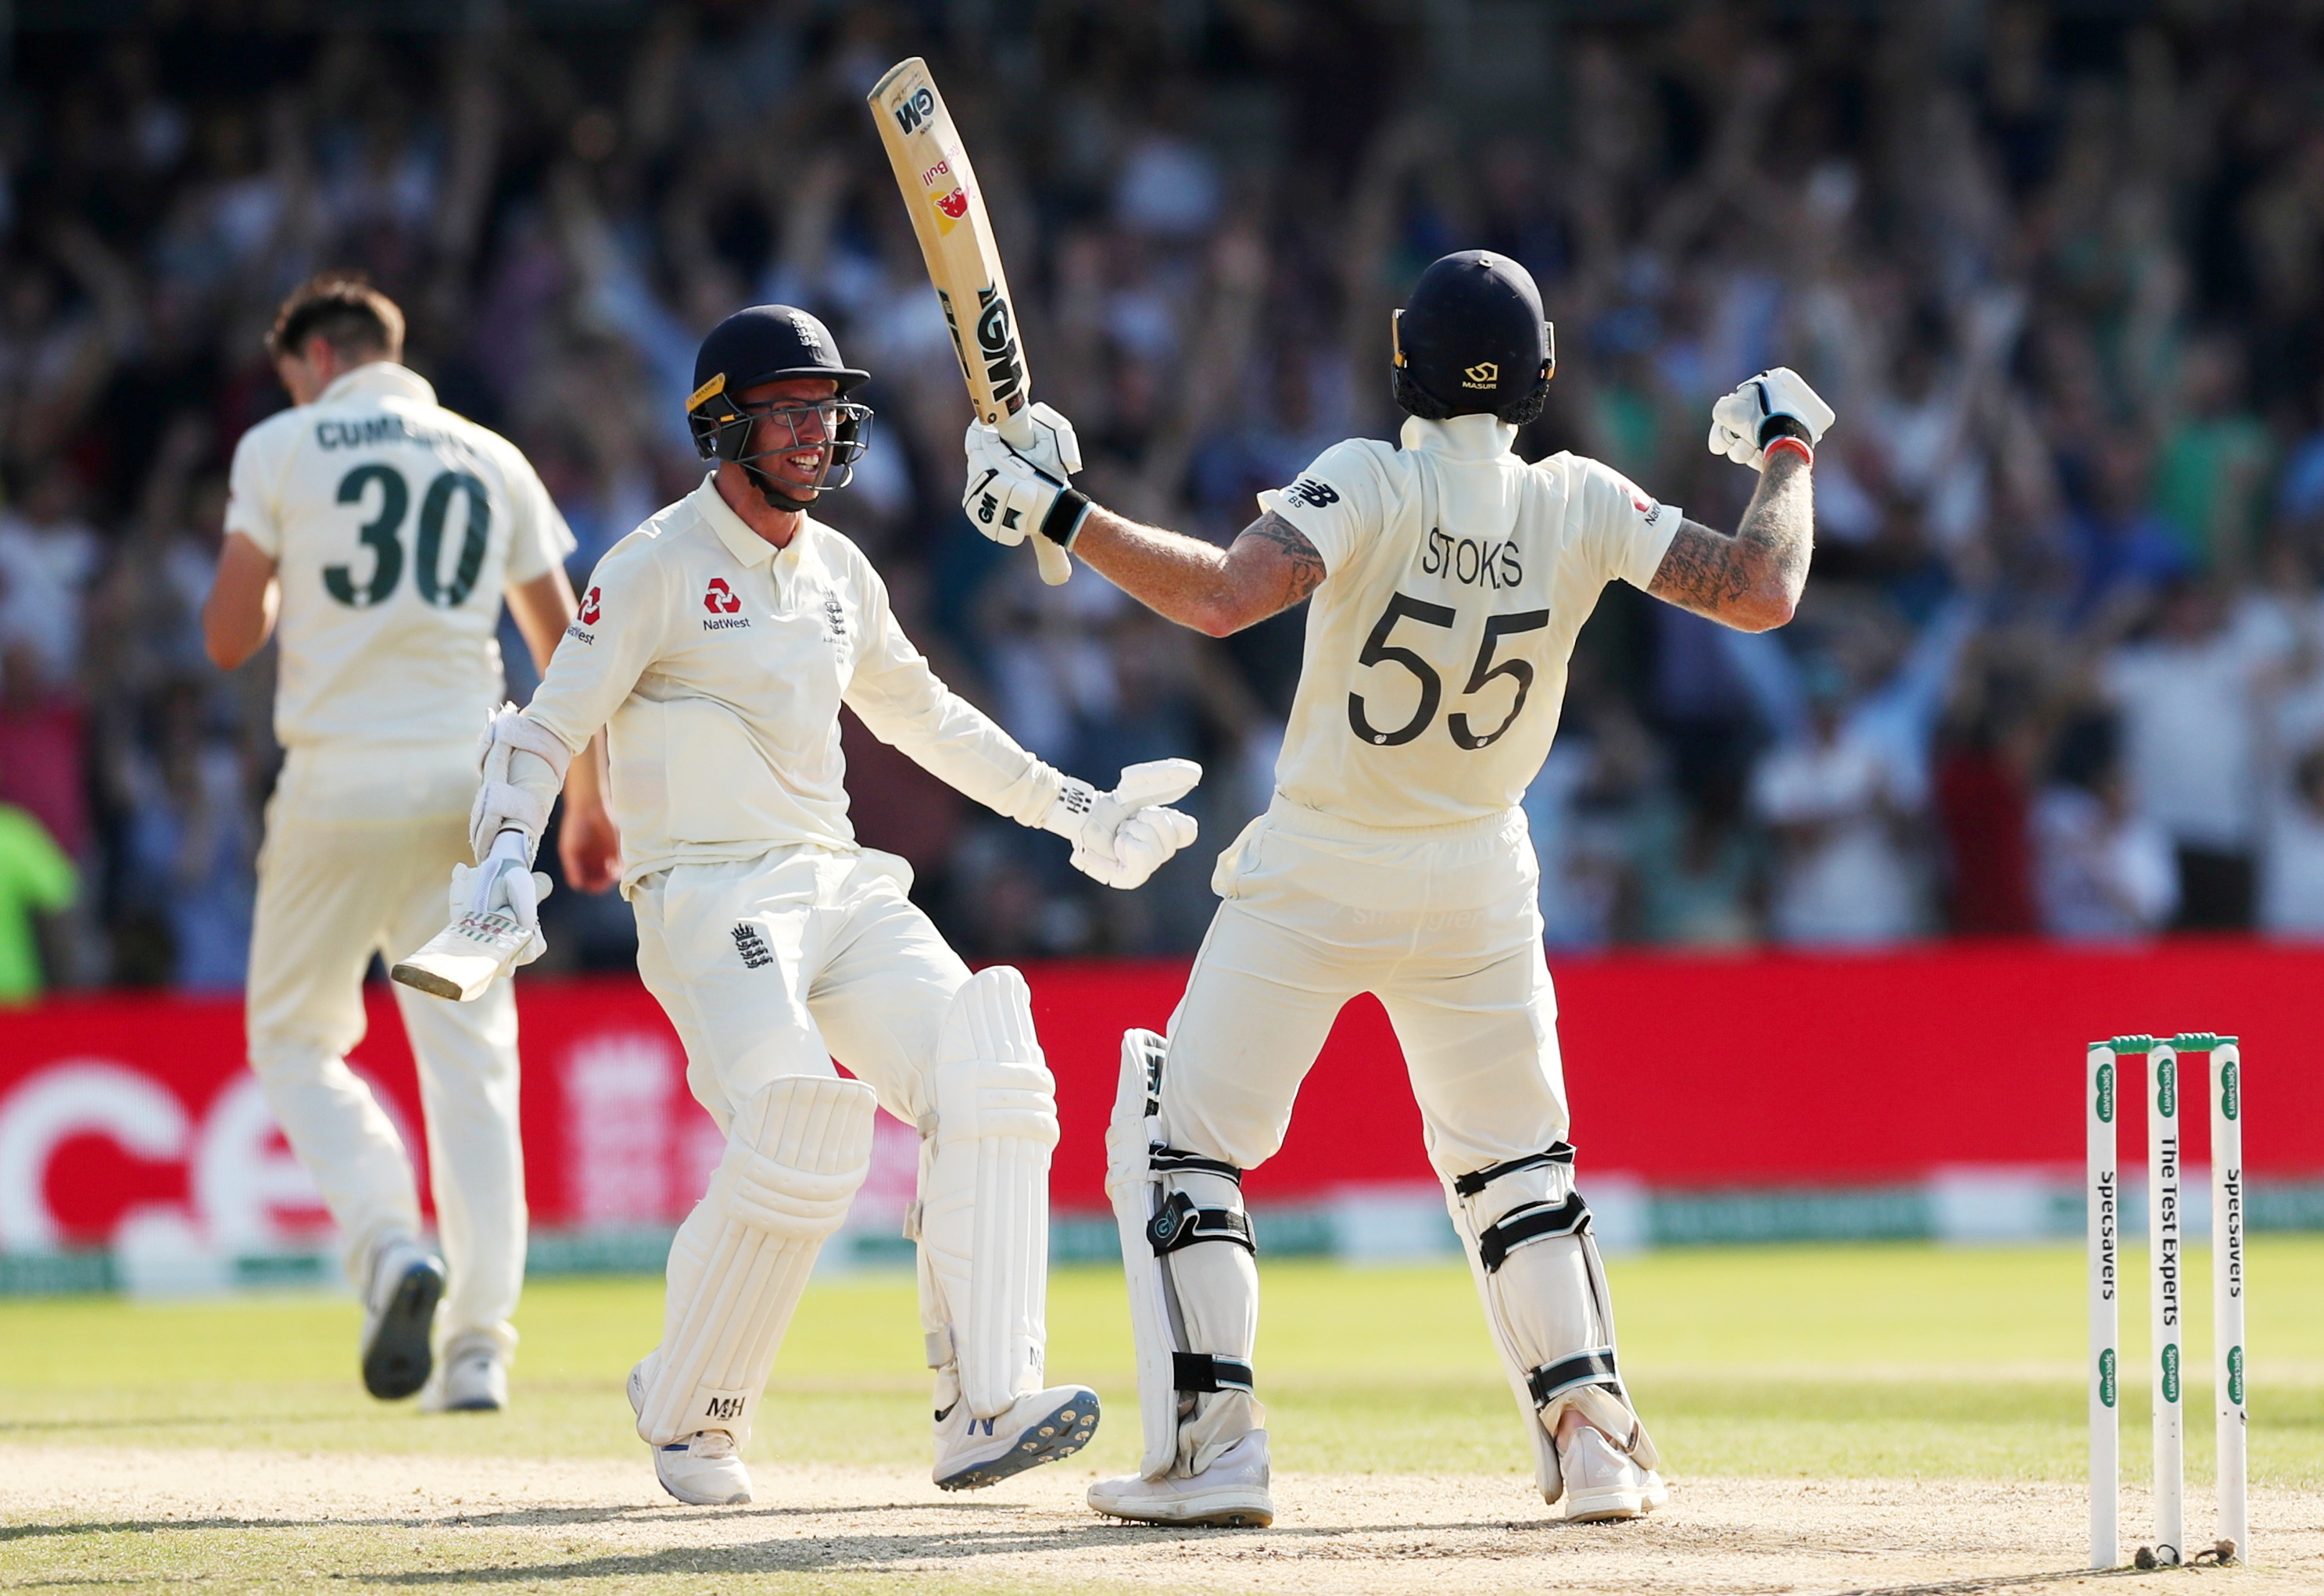 Cricket - Ashes 2019 - Third Test - England v Australia - Headingley, Leeds, Britain - August 25, 2019  England's Ben Stokes and Jack Leach celebrate winning the test  Action Images via Reuters/Lee Smith/File Photo